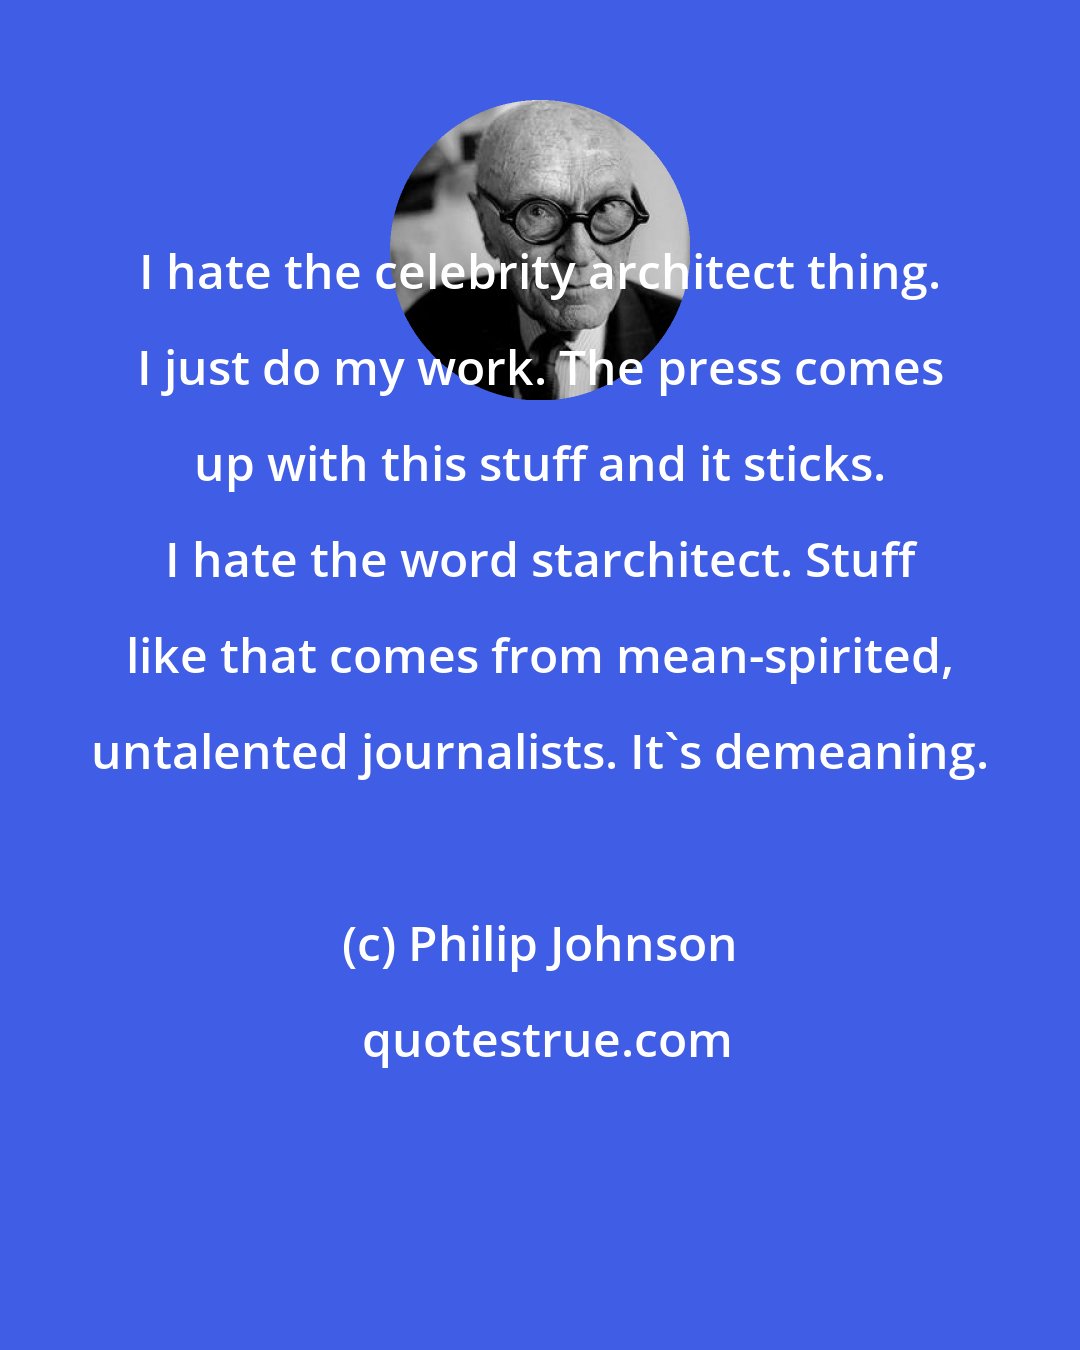 Philip Johnson: I hate the celebrity architect thing. I just do my work. The press comes up with this stuff and it sticks. I hate the word starchitect. Stuff like that comes from mean-spirited, untalented journalists. It's demeaning.